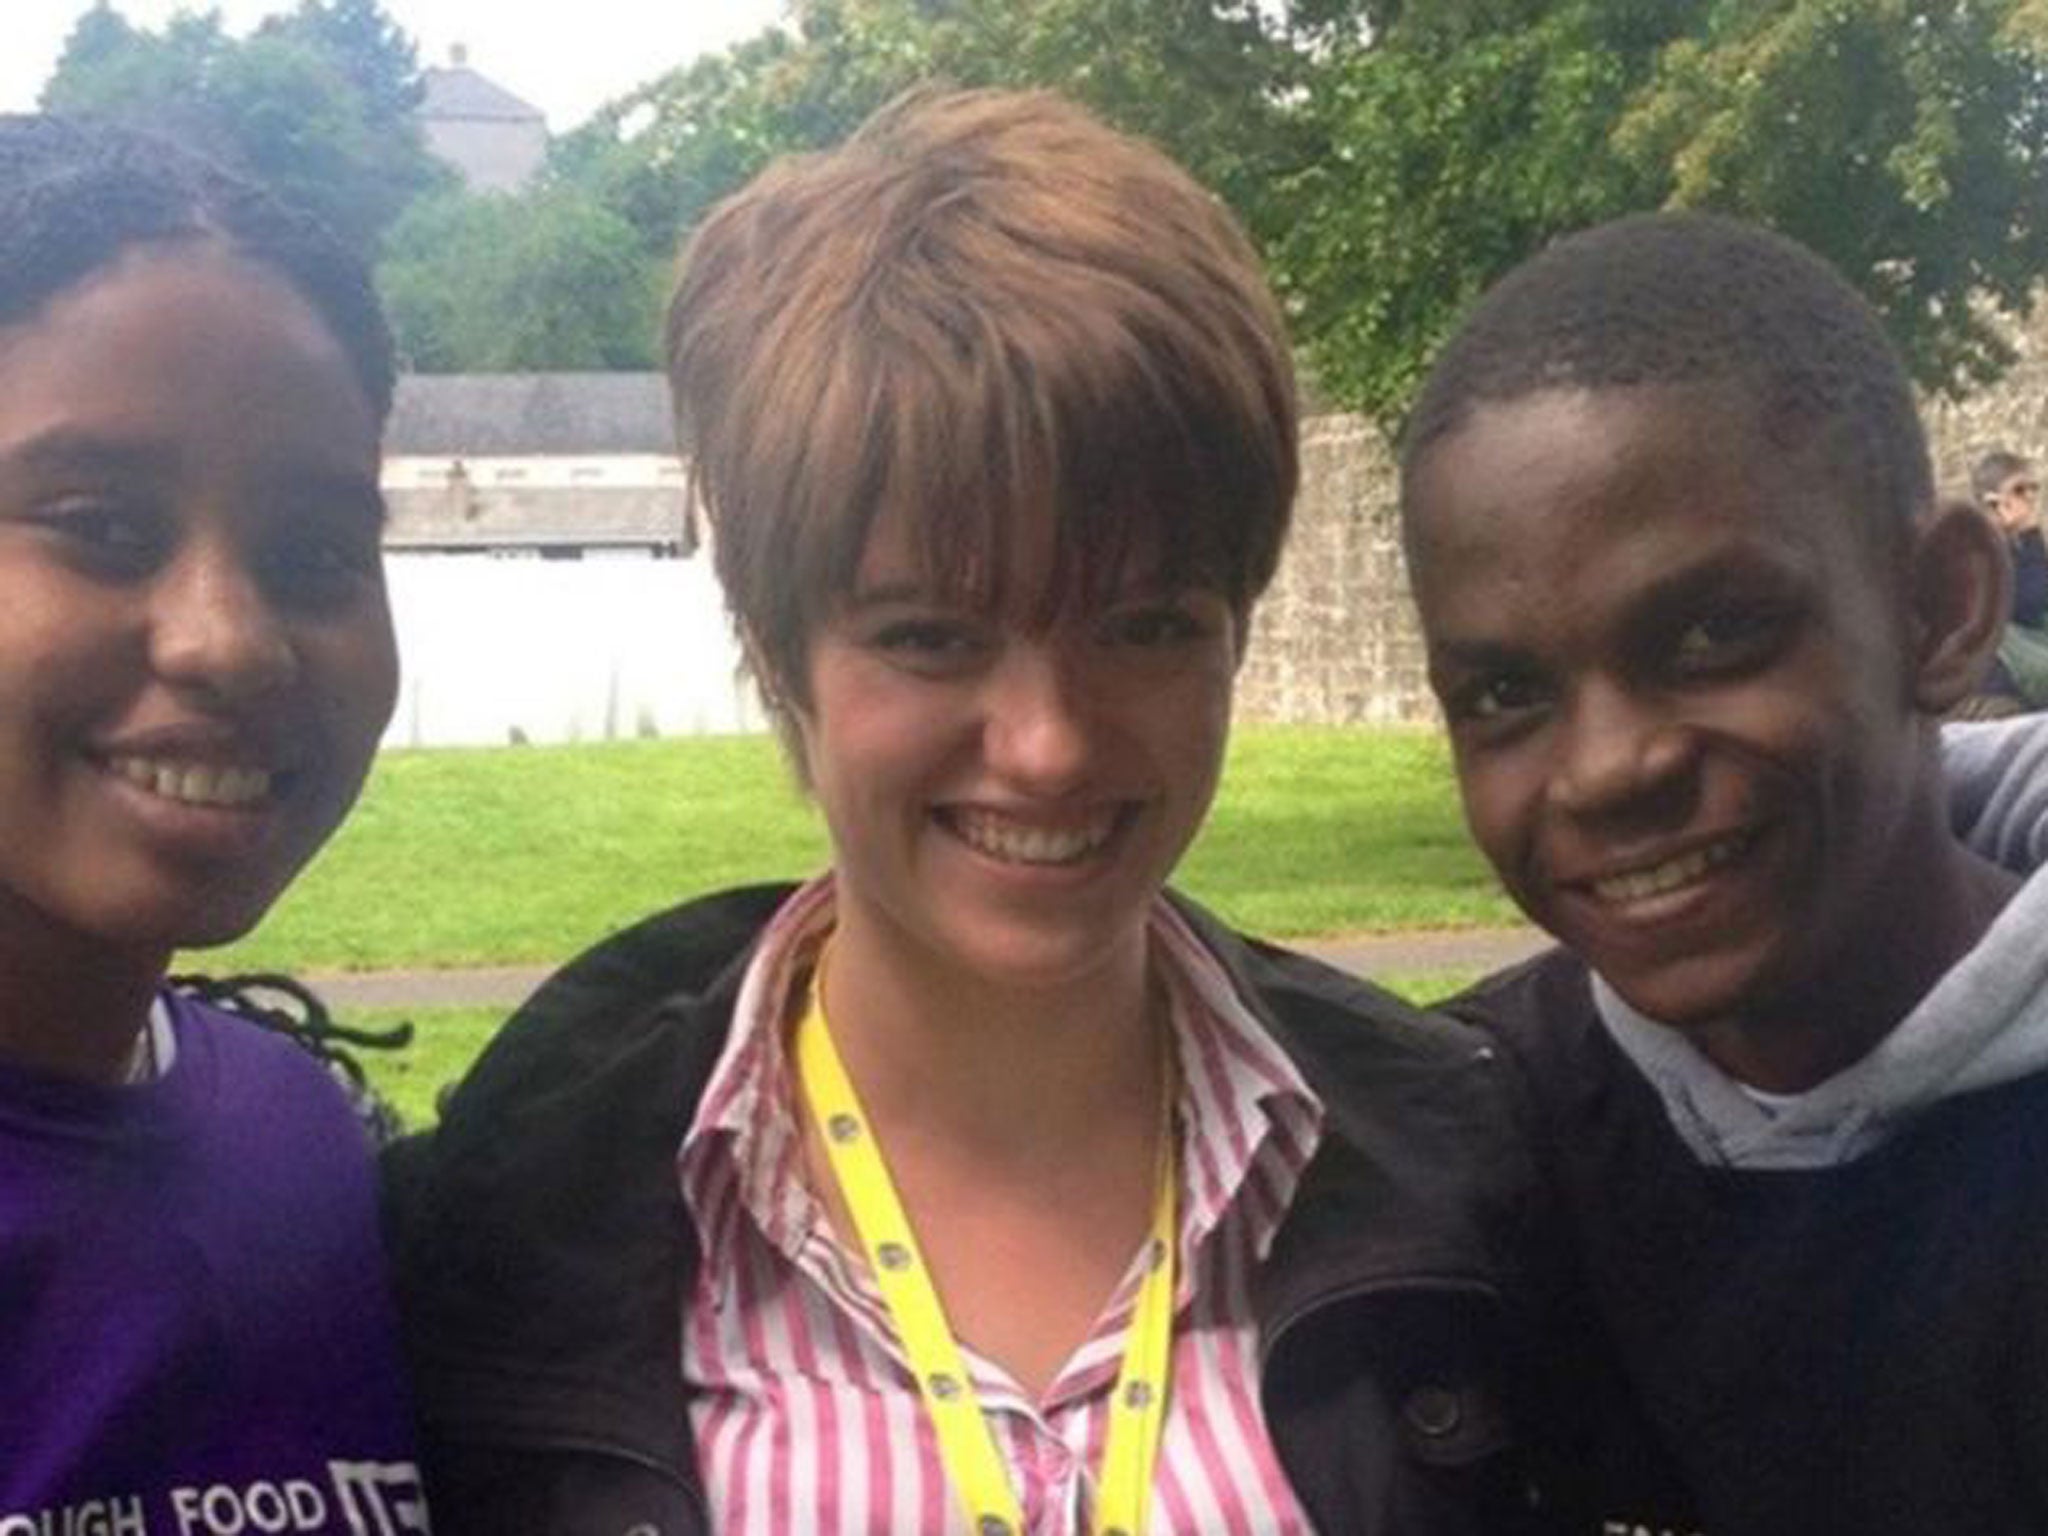 Jack Monroe, centre, with Frank, right, at the G8 summit